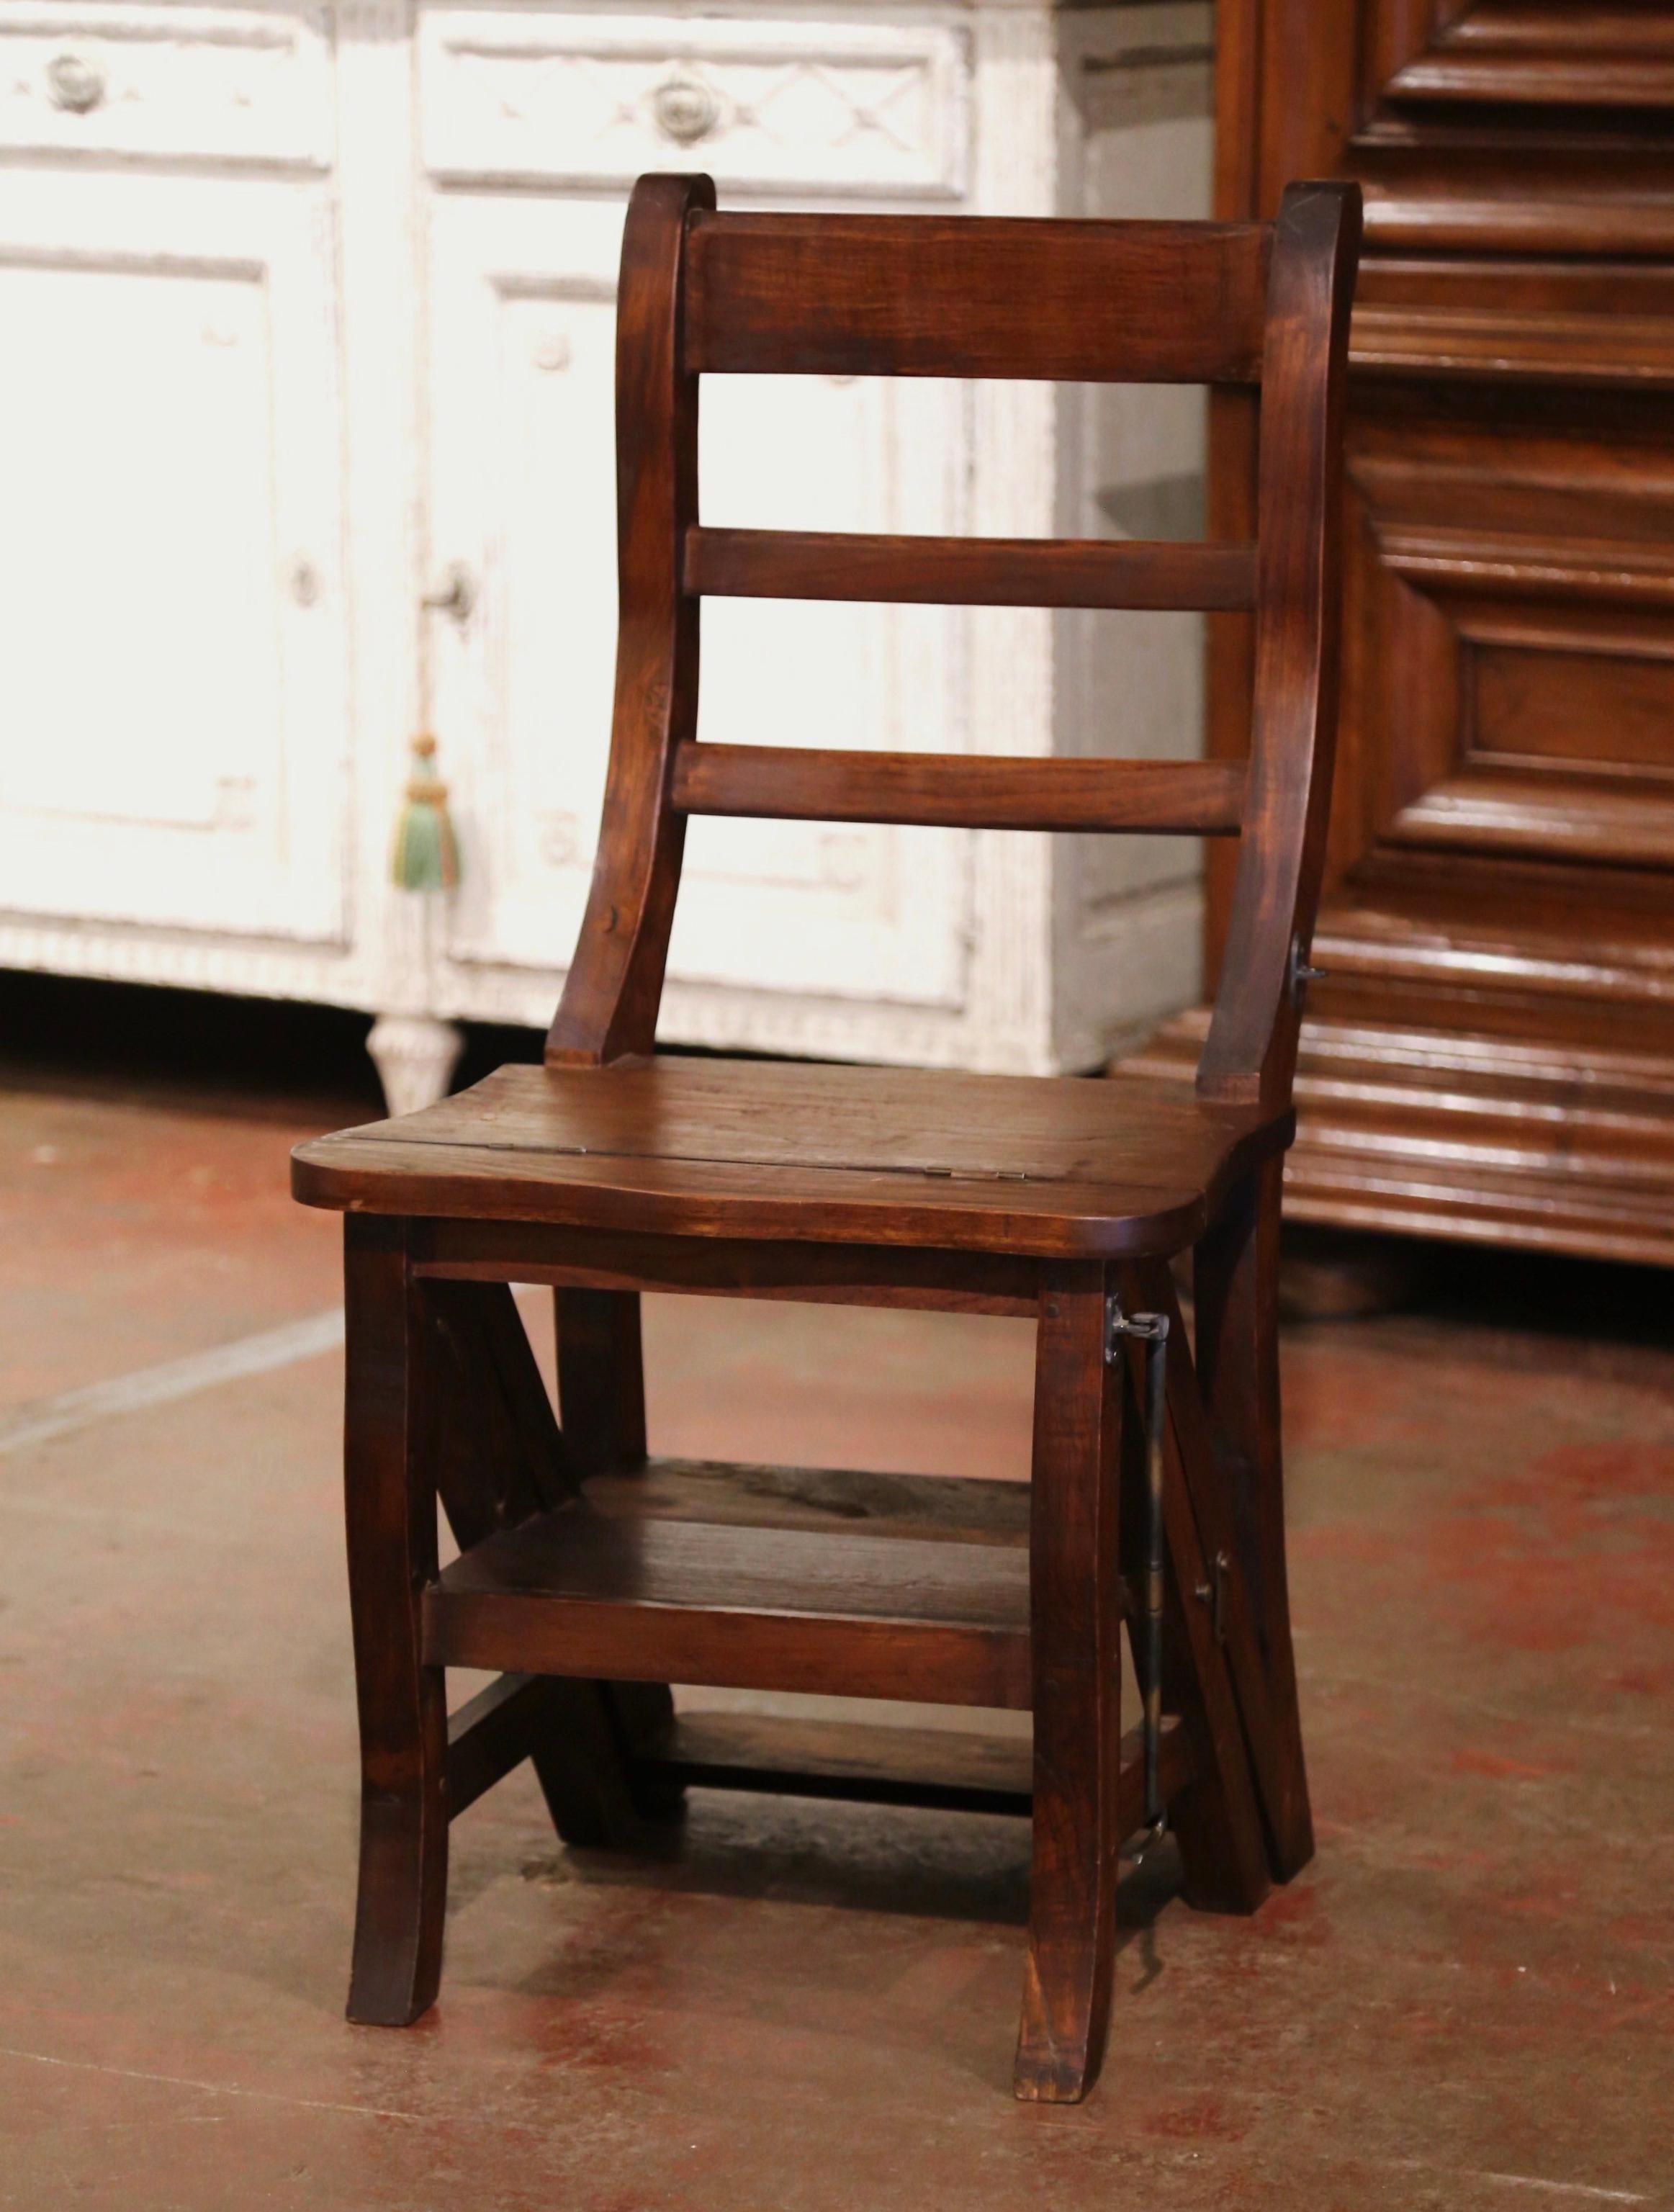 Decorate a library or study with this artisan-made folding step ladder chair. Crafted in Southern France circa 1980, the metamorphic chair features three carved ladders in the back; the double-function piece is hinged so that it can convert into a